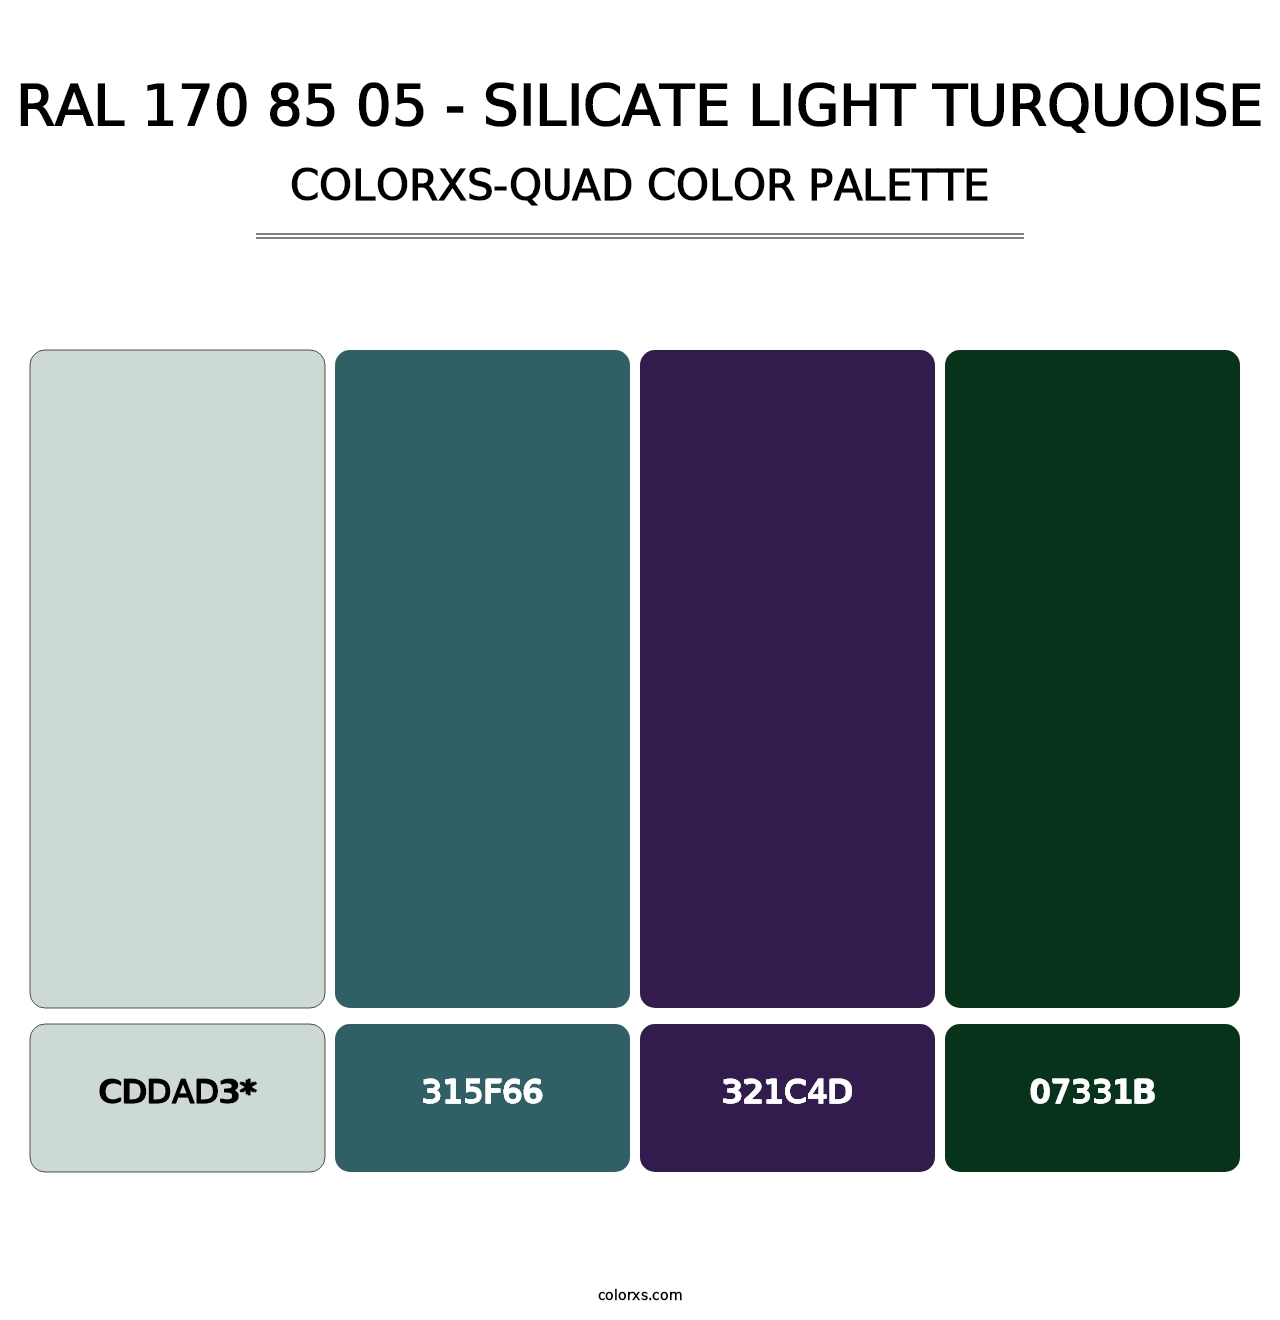 RAL 170 85 05 - Silicate Light Turquoise - Colorxs Quad Palette